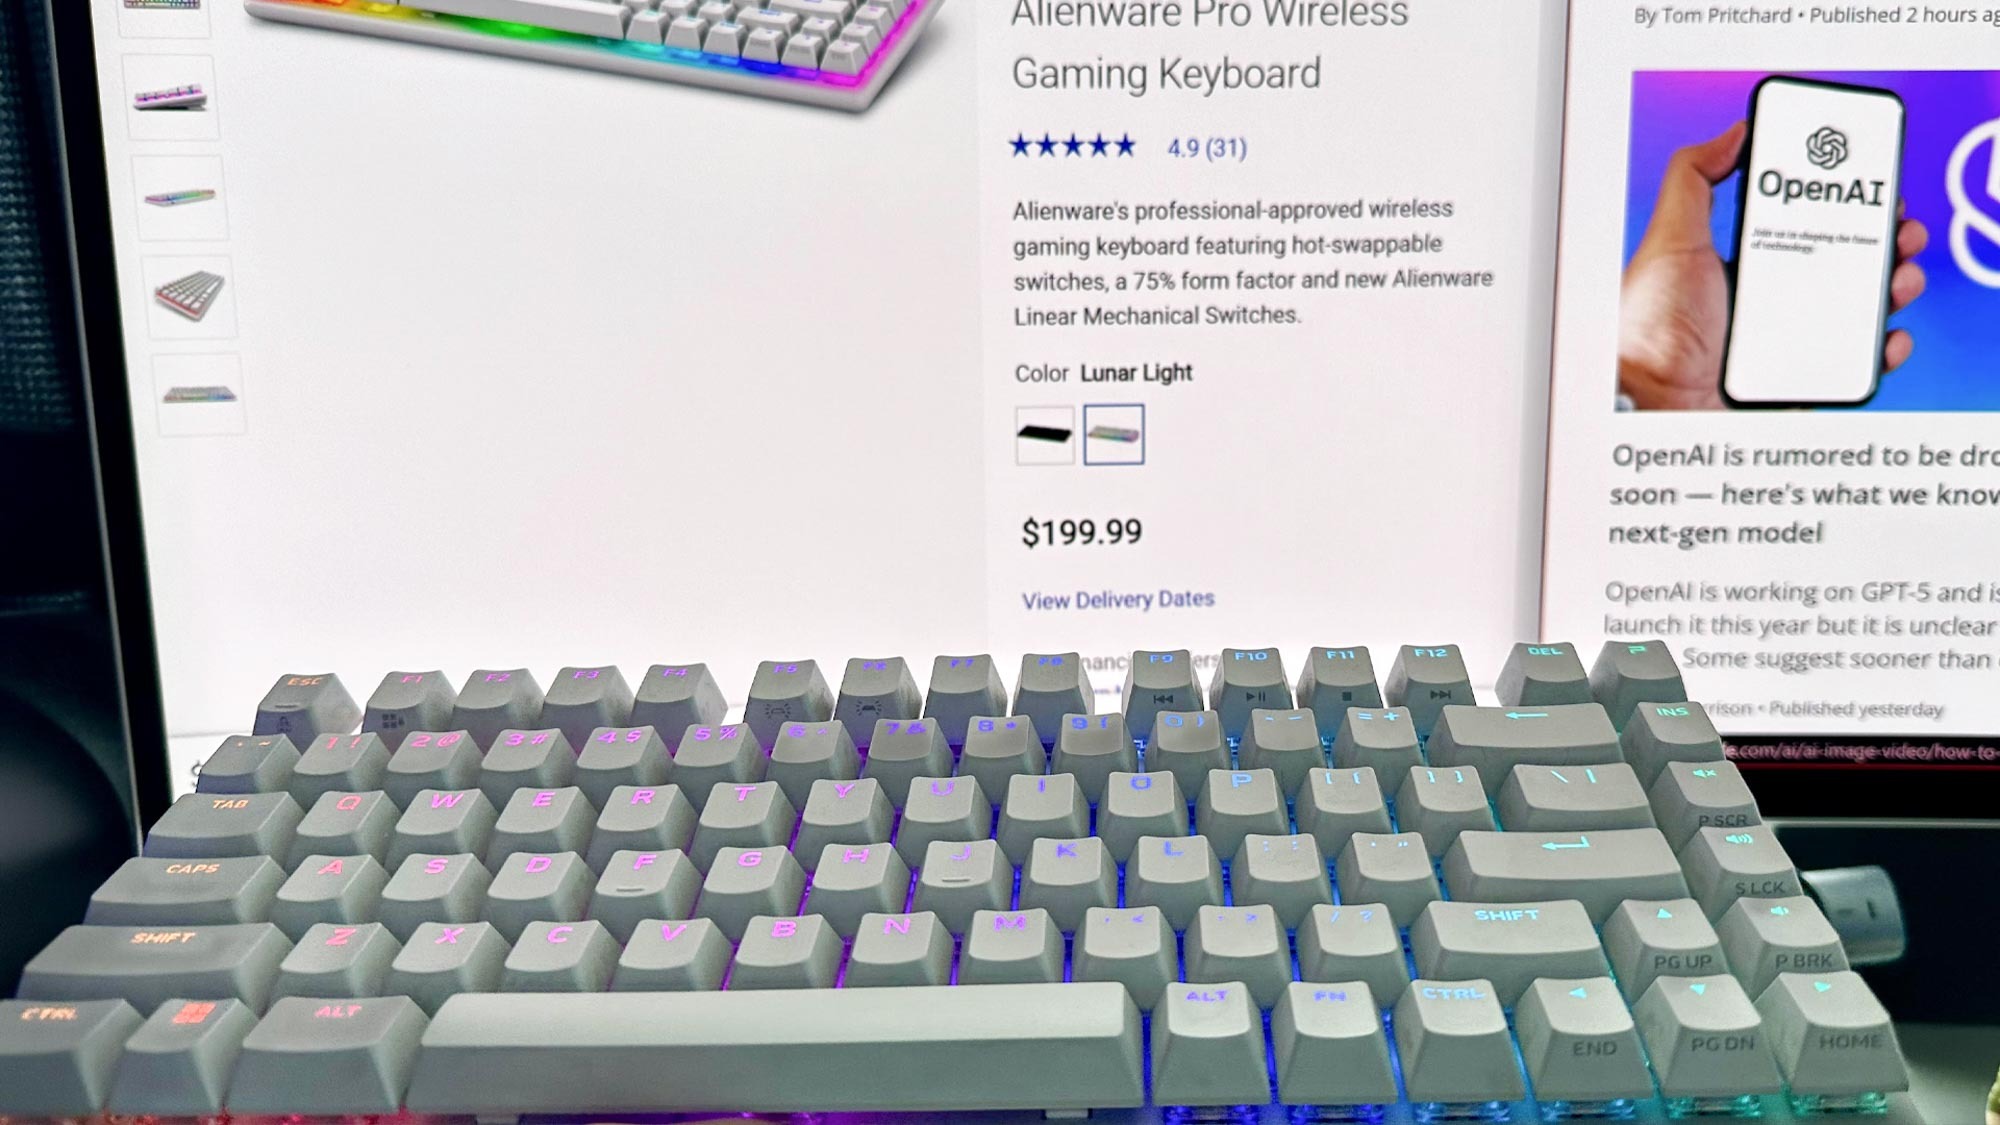 Alienware Pro keyboard in front of a screen of the official Dell product page.